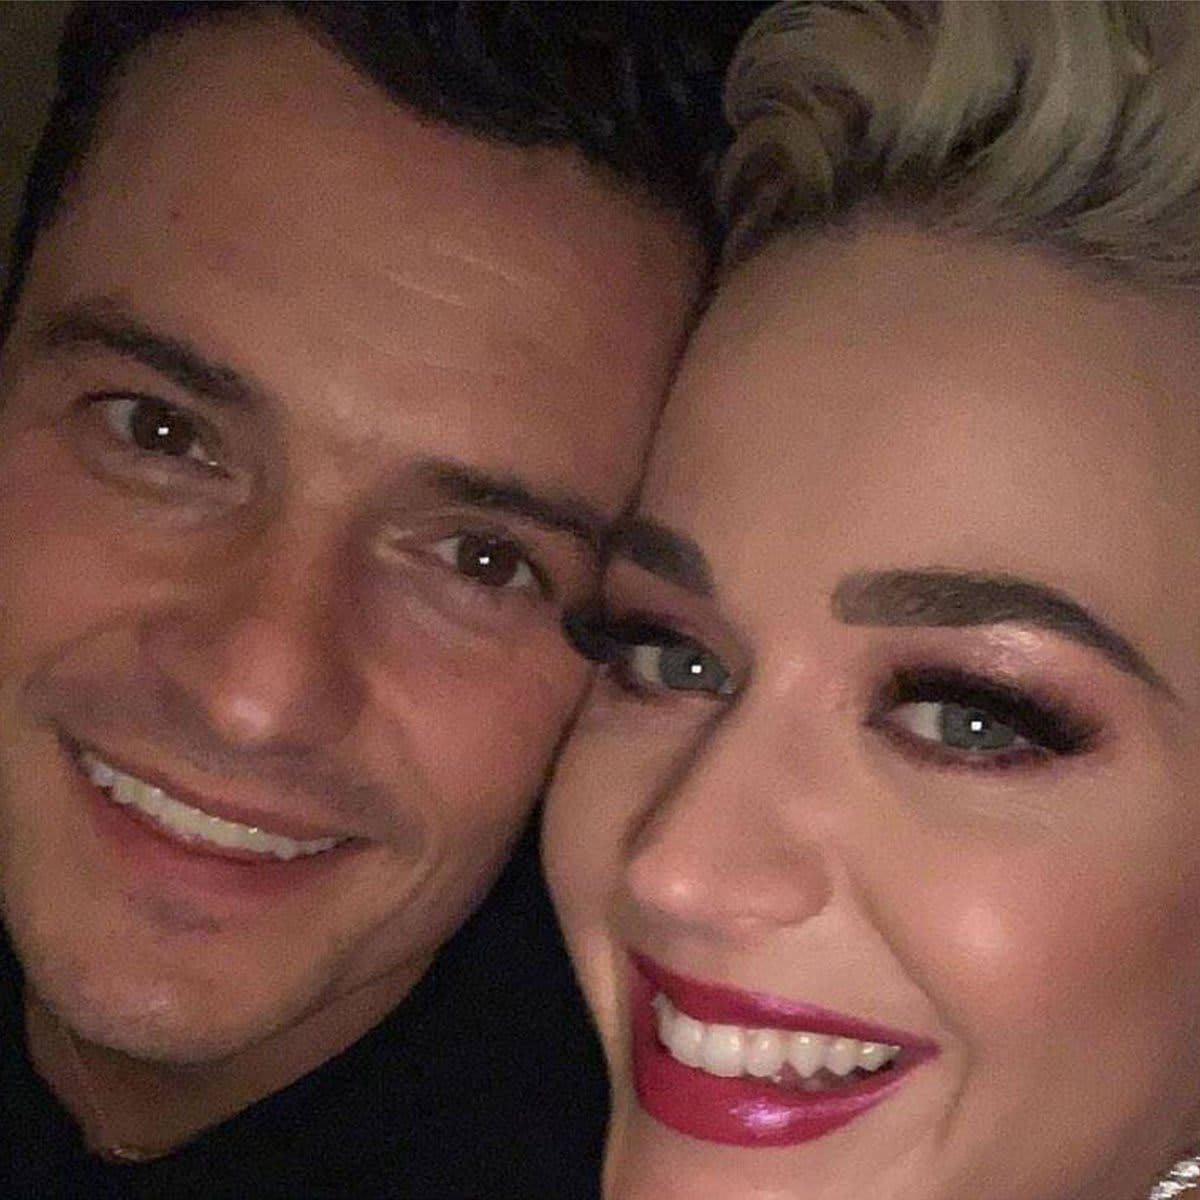 Katy Perry wishes a happy birthday to Orlando Bloom sharing never-before-seen photos